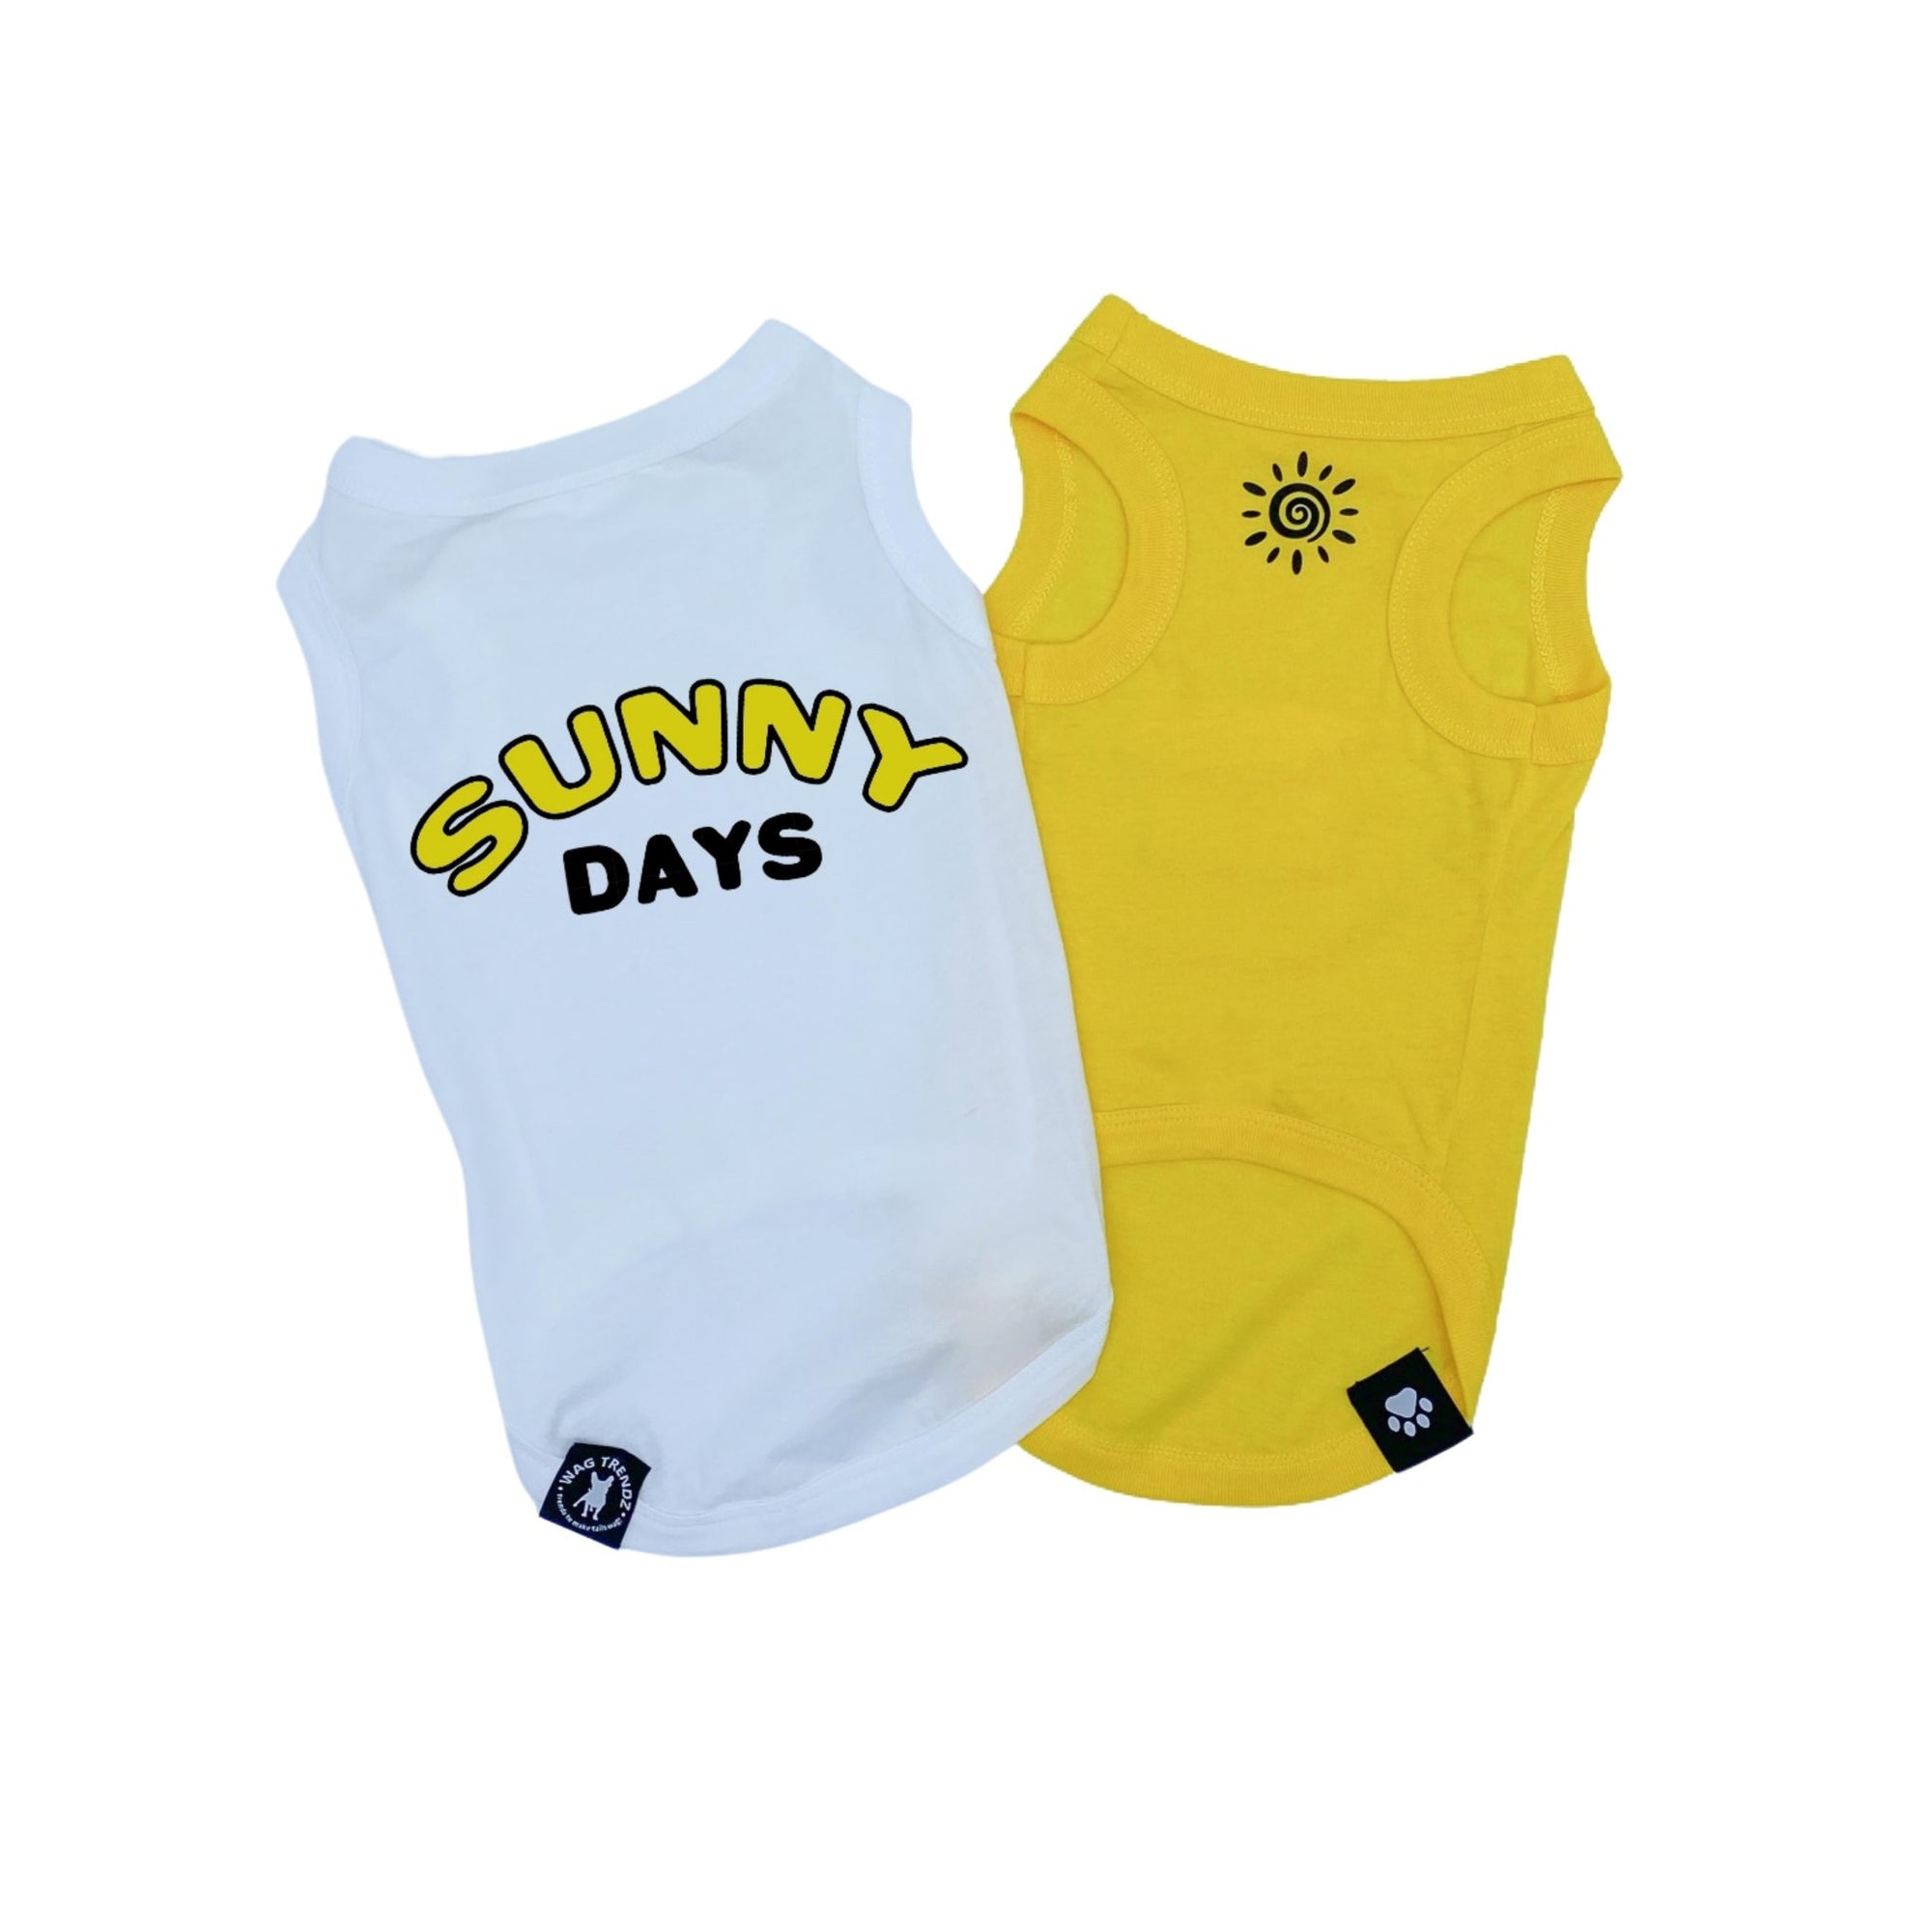 Dog T-Shirt - &quot;Sunny Days&quot; dog t-shirts in White and Yellow - Sunny Days lettering on white t-shirt in black and yellow and a modern sunshine emoji in black on chest of yellow t-shirt - lettering and emoji is in yellow and black - against solid white background - Wag Trendz